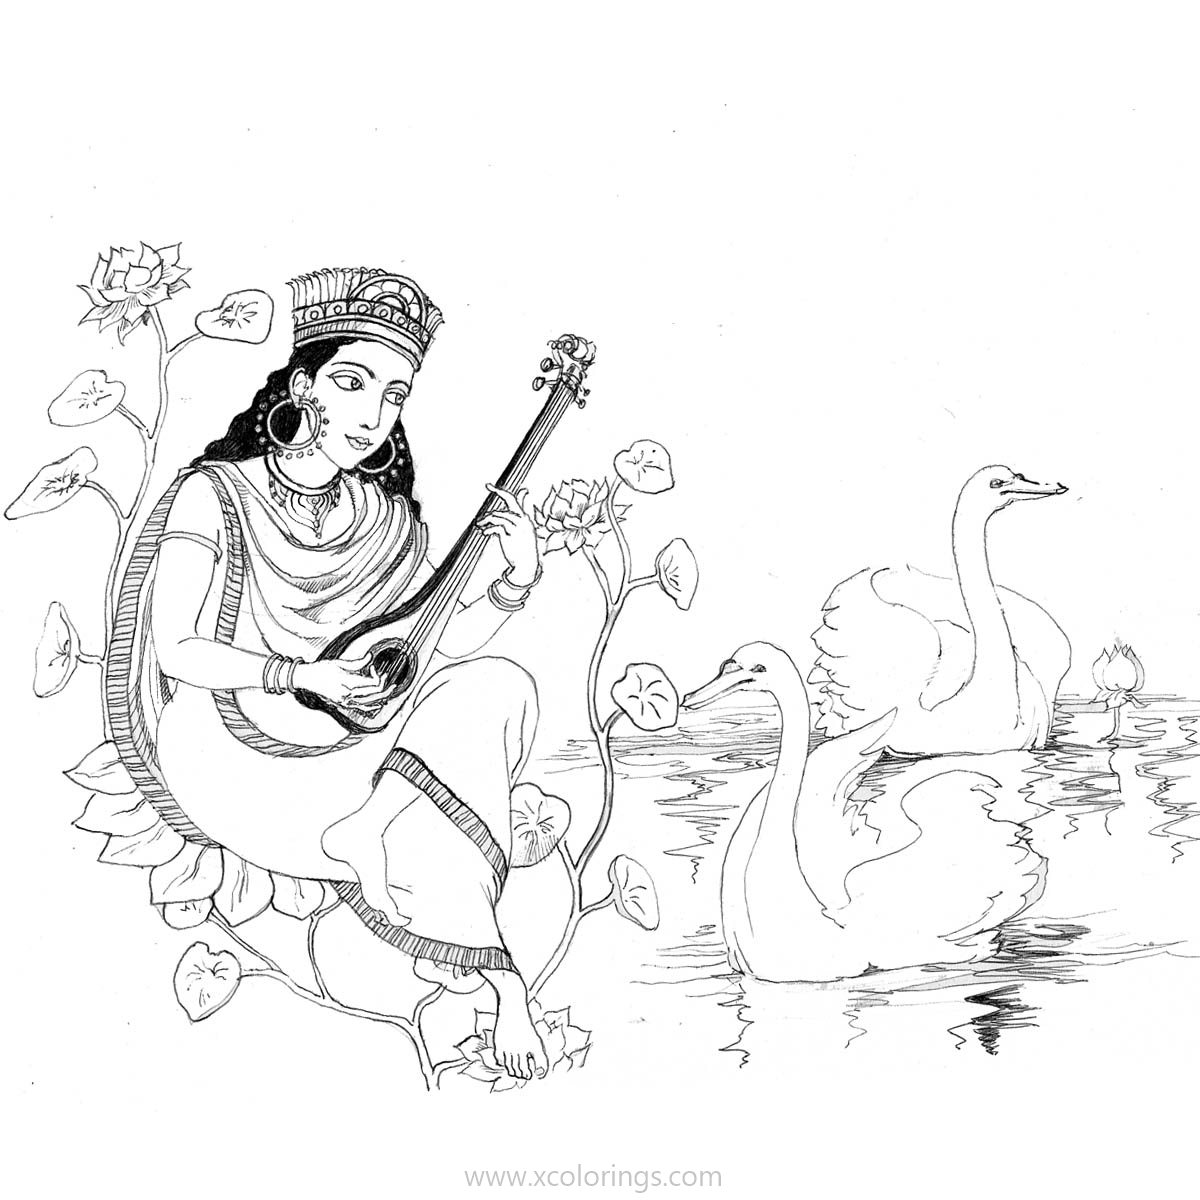 Free Saraswati Playing Veena Coloring Pages with Swans printable